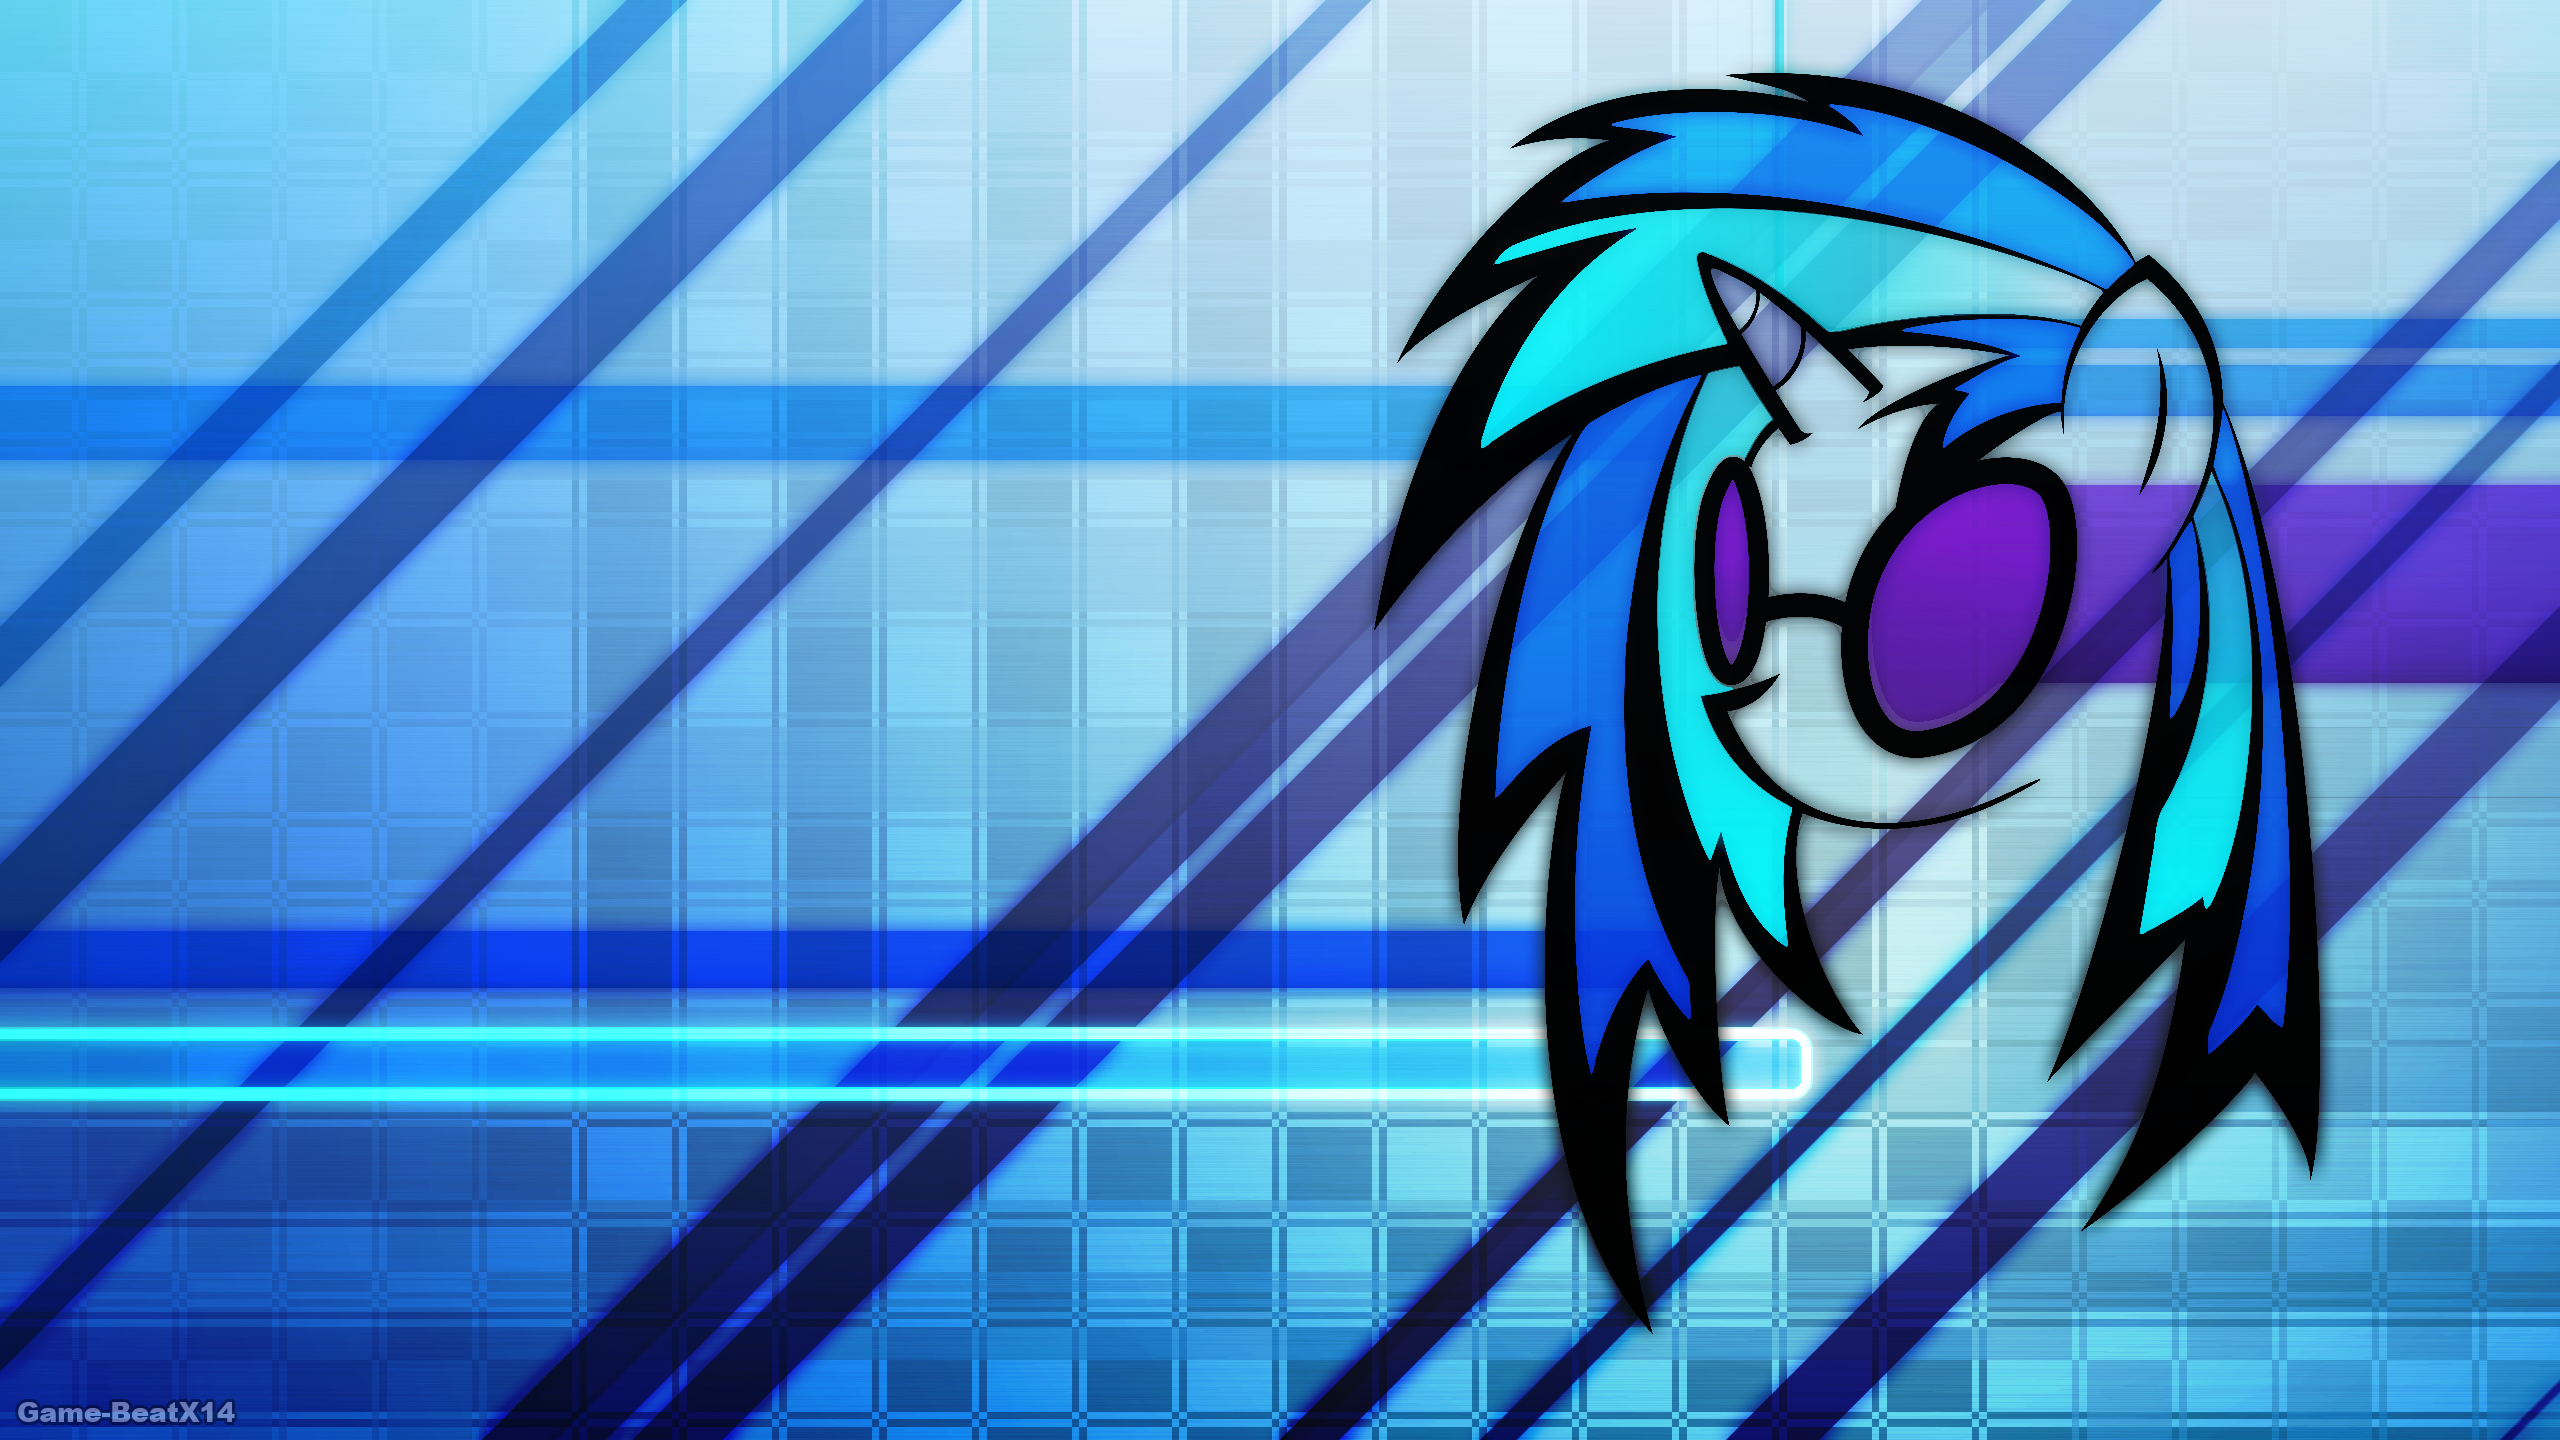 DJ Horse Wallpaper #874 by Game-BeatX14 and QQwich